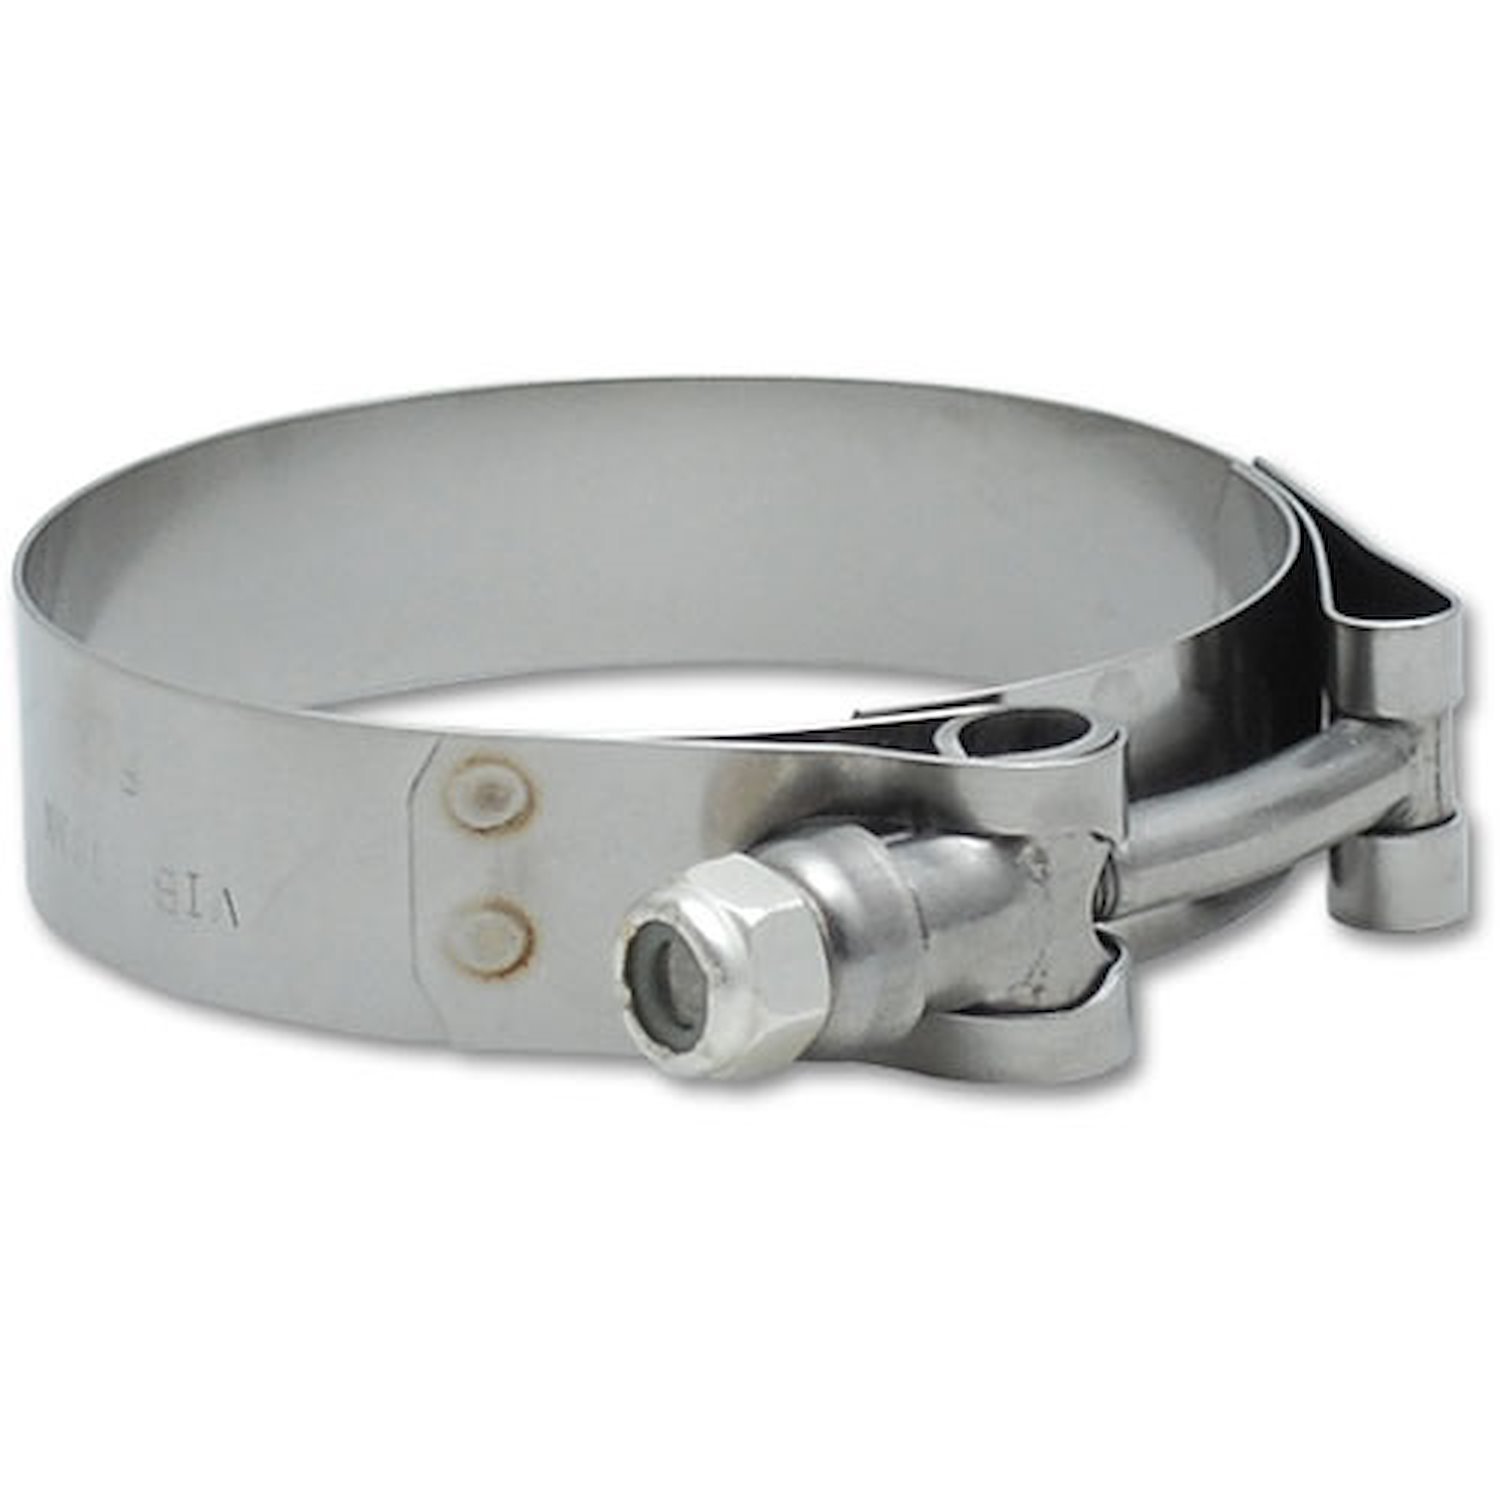 Stainless Steel T-Bolt Clamps Clamp Range 2.53" - 2.75"